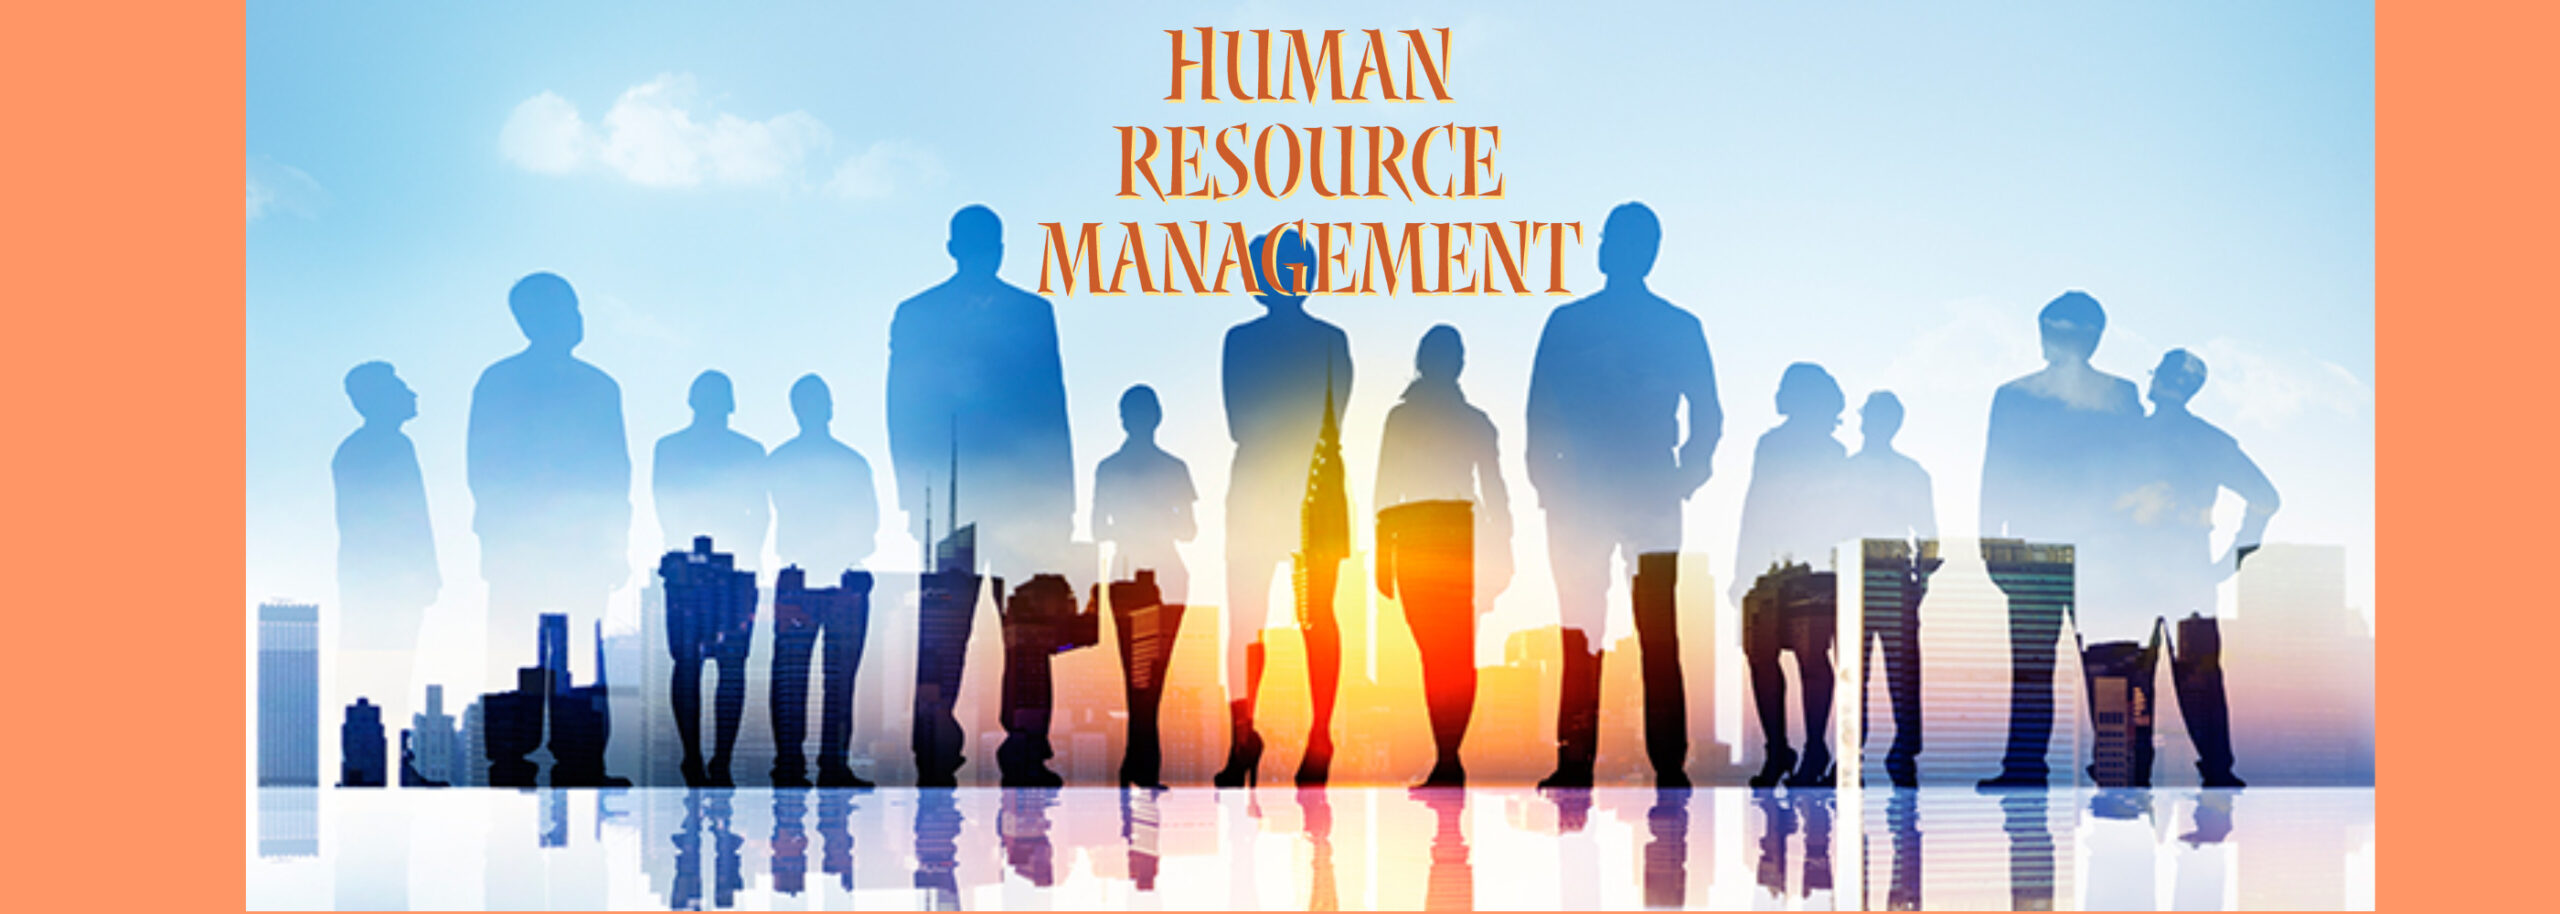 objectives of human resource management